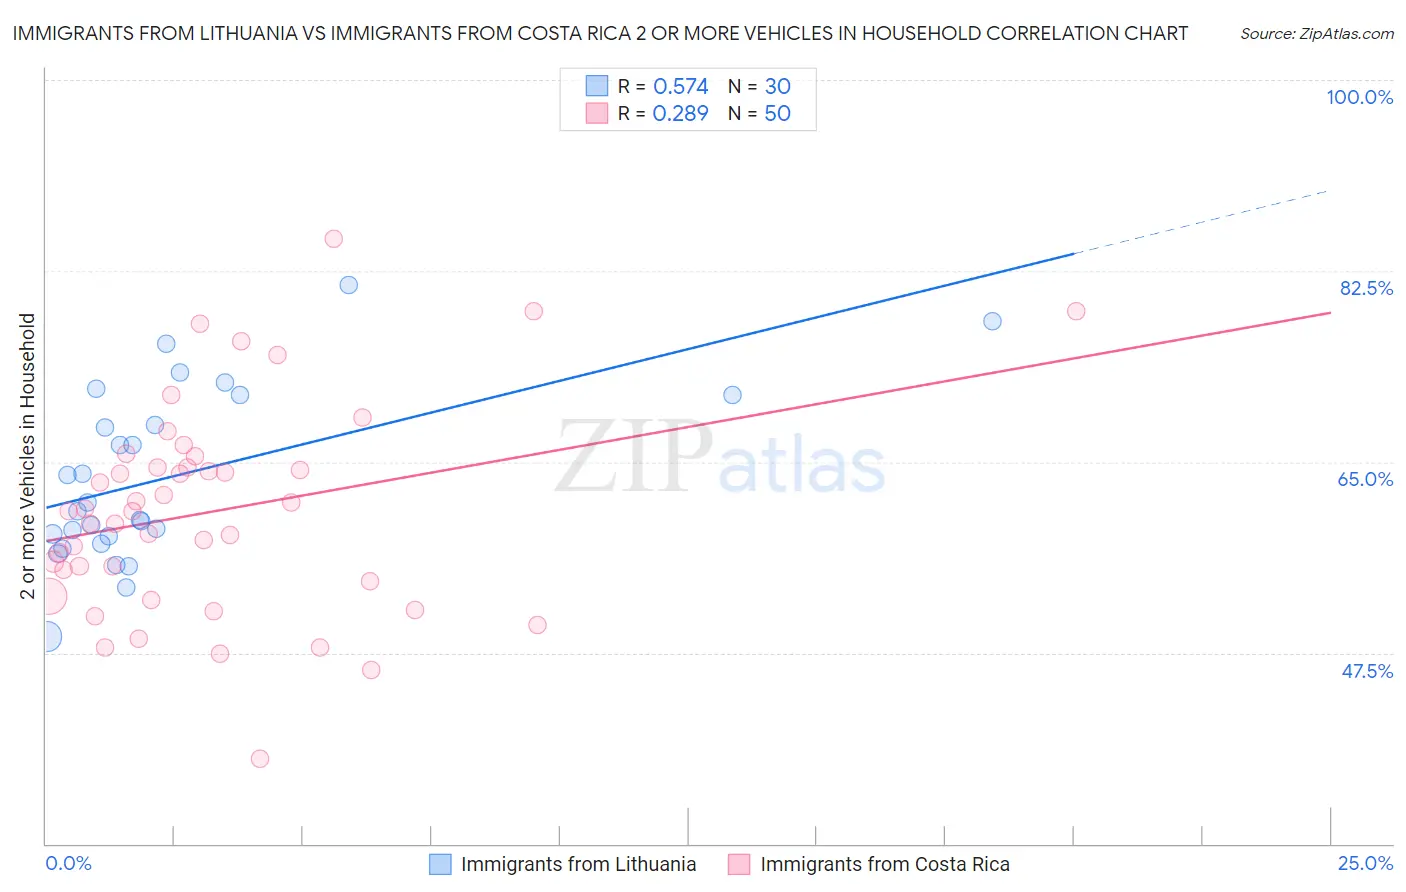 Immigrants from Lithuania vs Immigrants from Costa Rica 2 or more Vehicles in Household